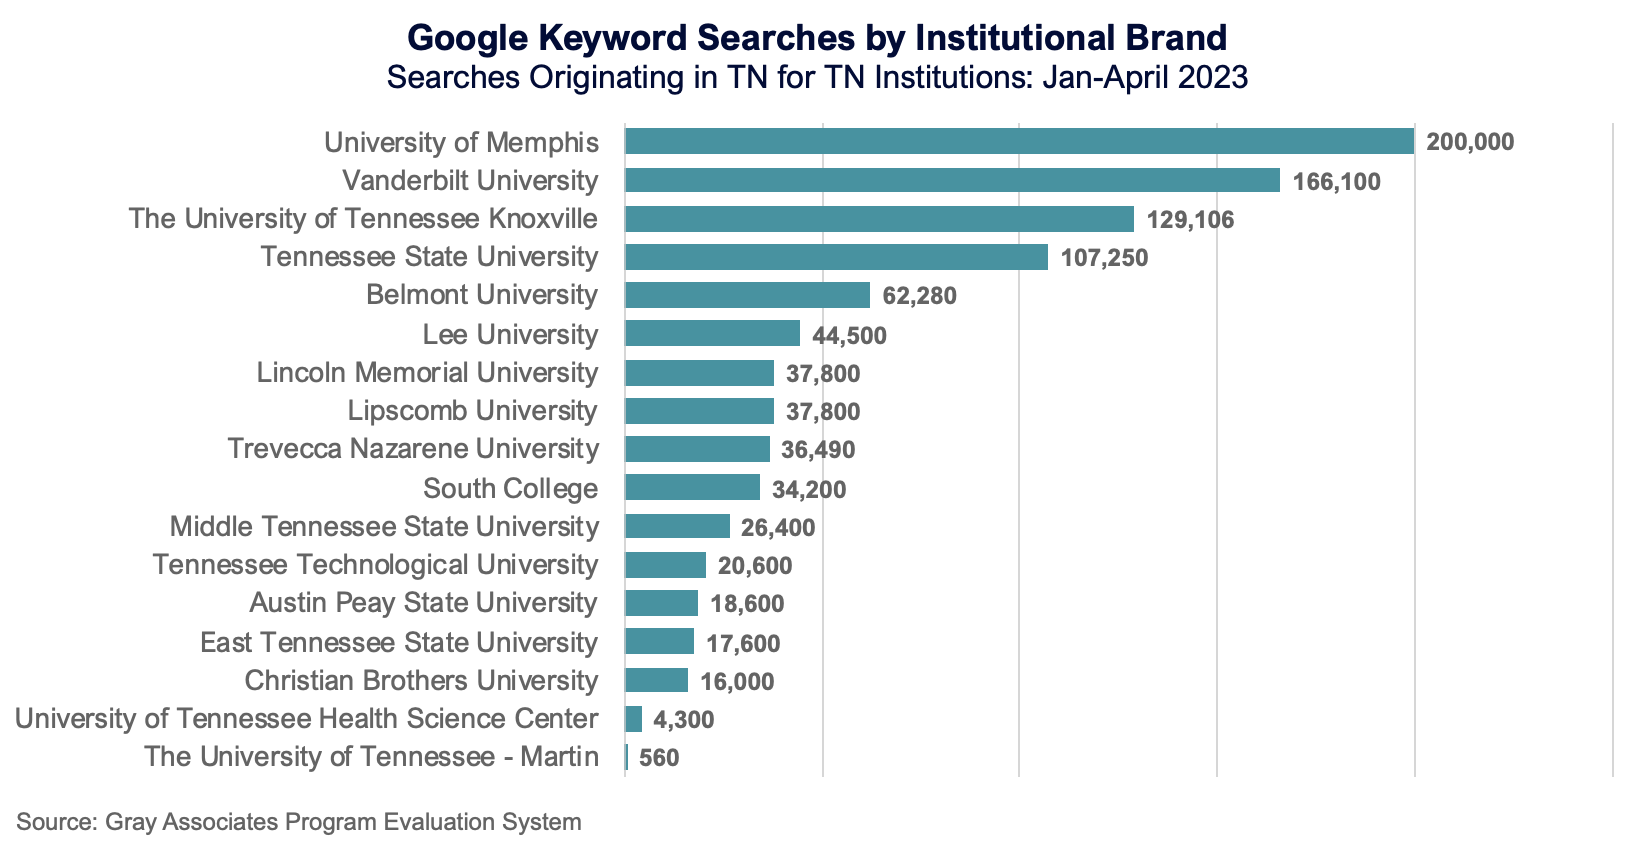 Google Keyword Search by Institutional Brand (Searches Originating in TN for TN Institutions: Jan-April. 2023)